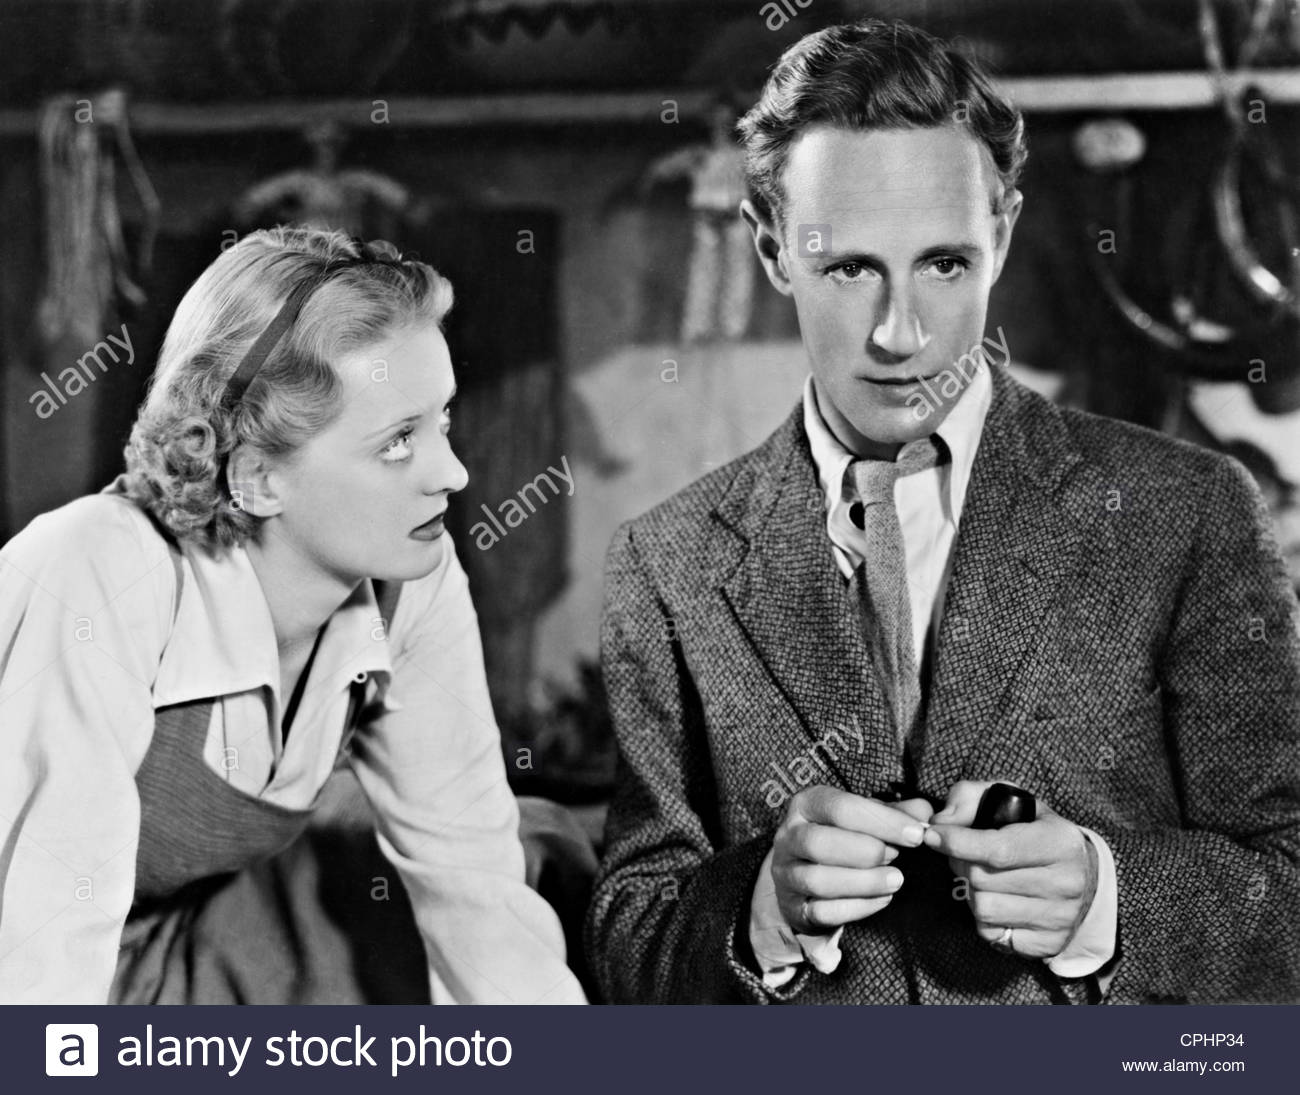 bette-davis-and-leslie-howard-in-the-petrified-forest-1936-CPHP34.jpg